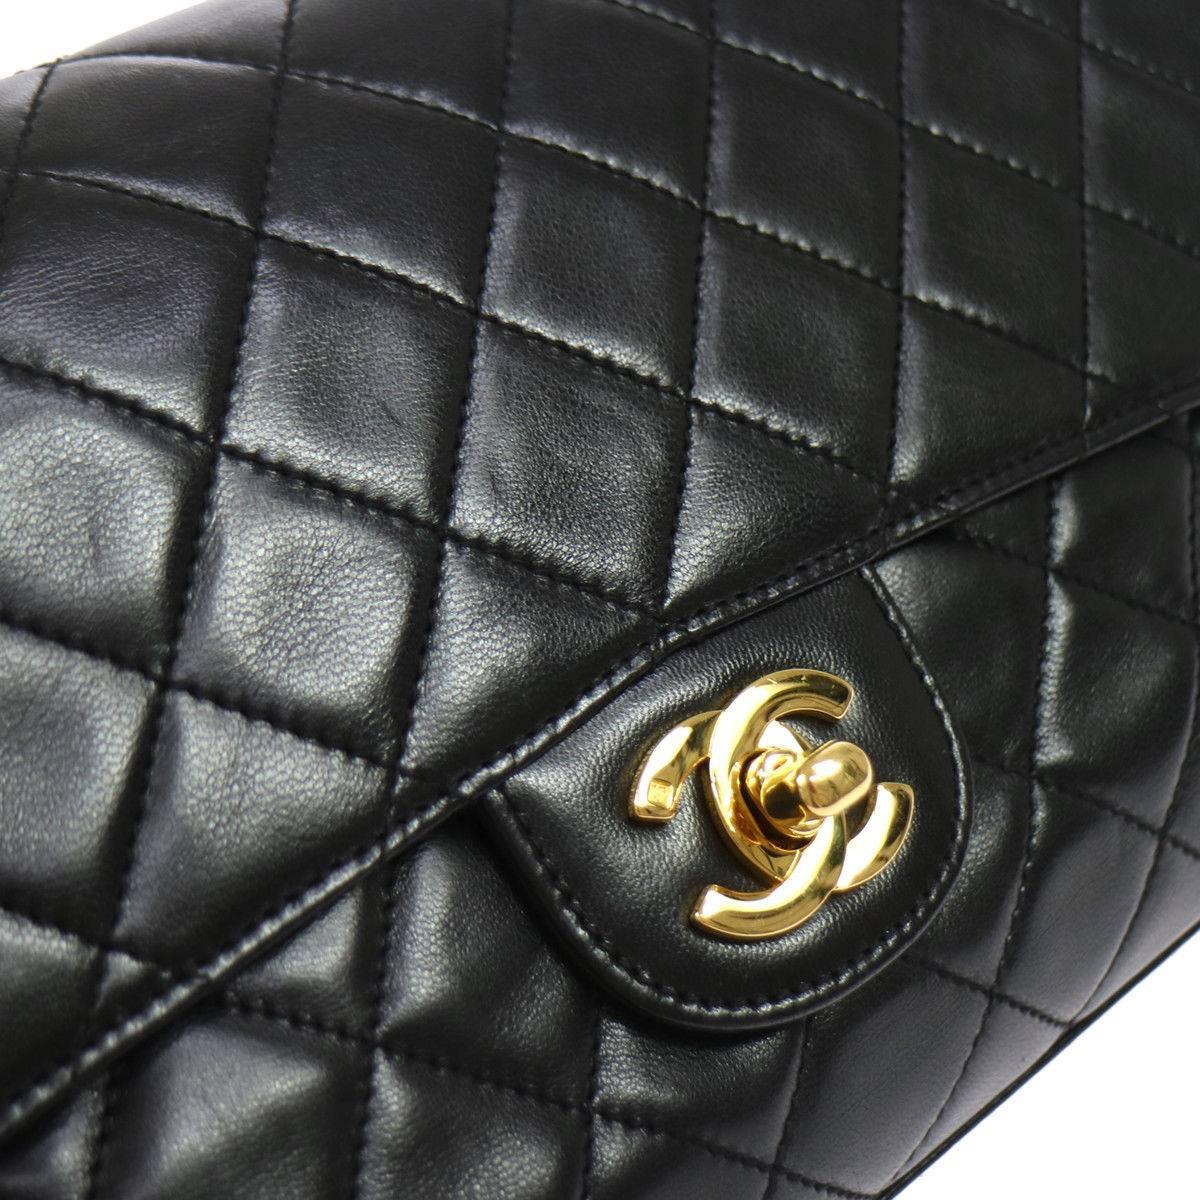 CURATOR'S NOTES

Chanel Black Lambskin Gold Top Handle Envelope Evening Clutch Flap Bag

Lambskin
Gold tone hardware
Leather lining
Date code present
Made in France
Measures 10.25" W x 6.25" H x 2.5" D 